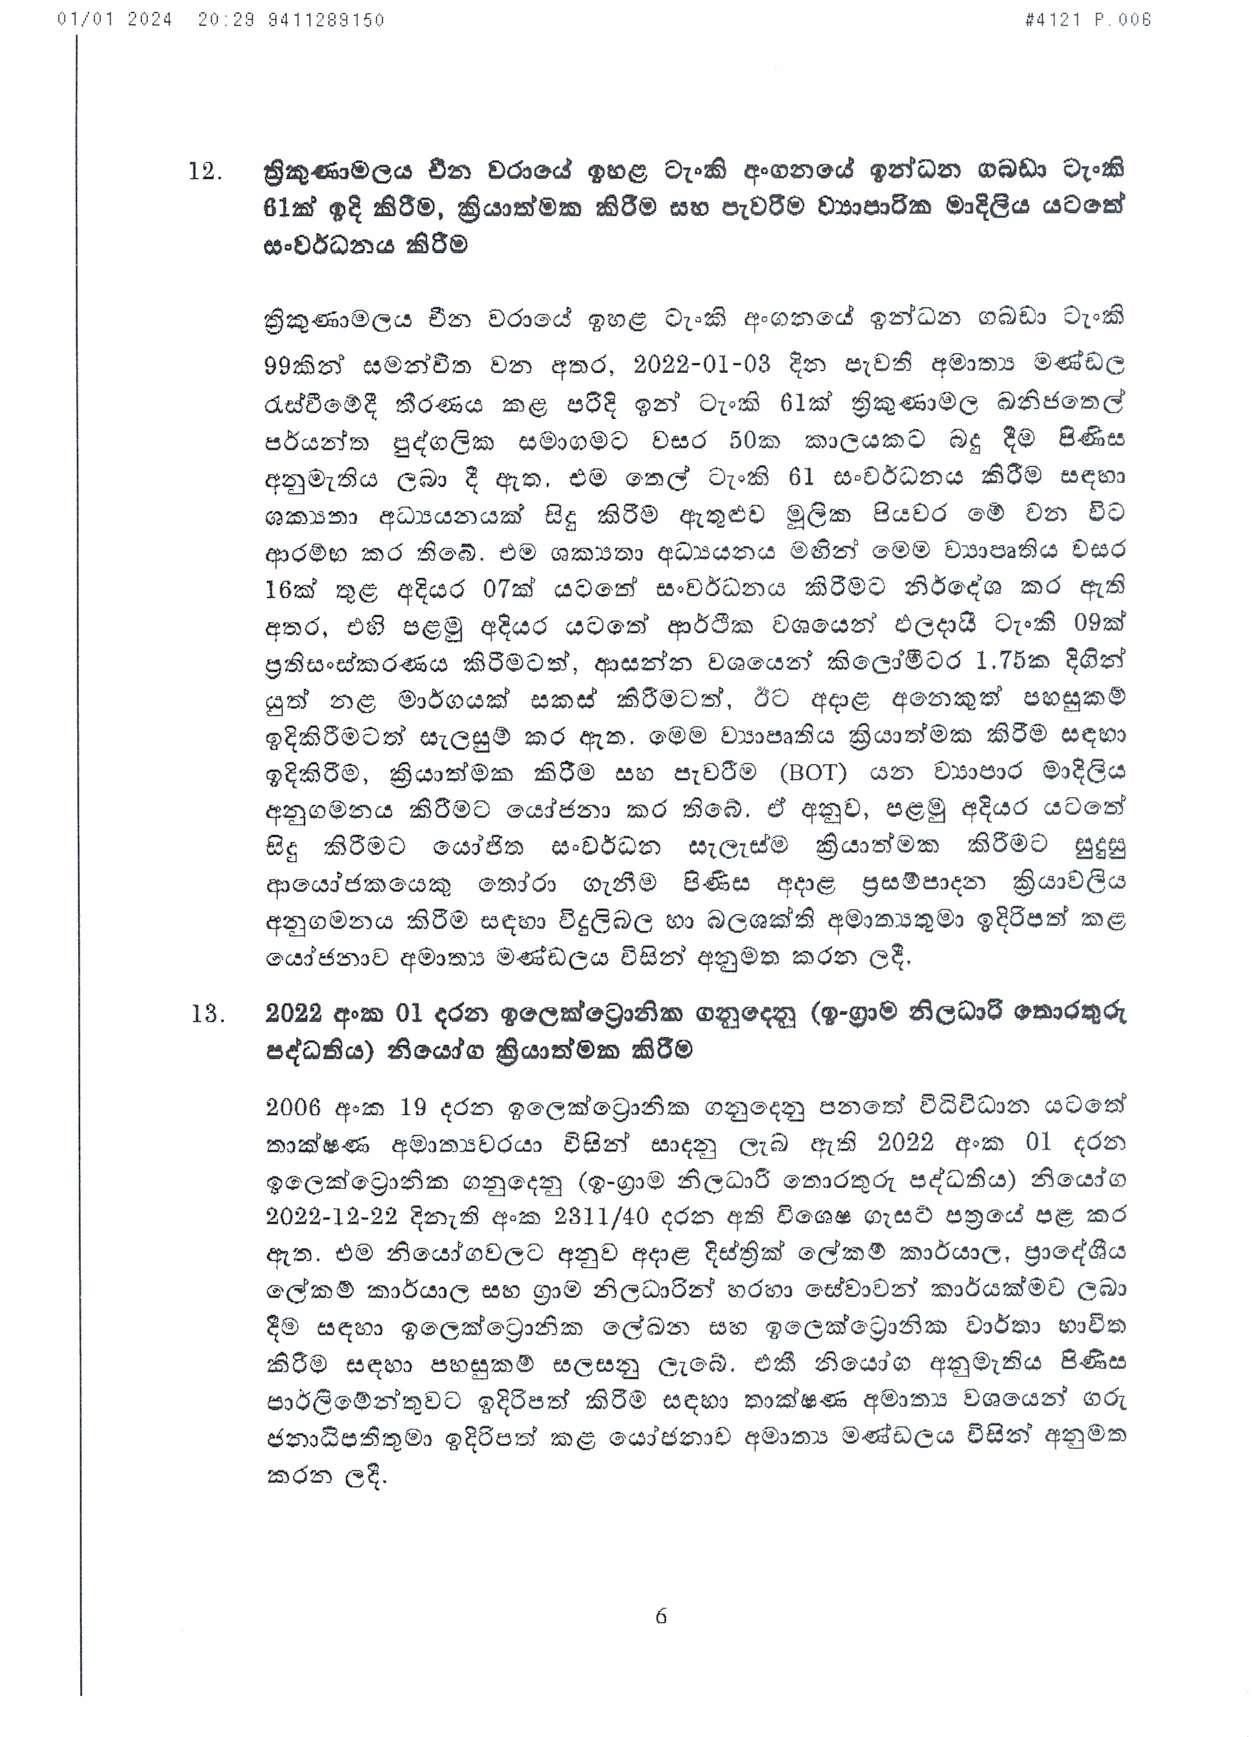 Cabinet Decision on 01.01.2024 page 006